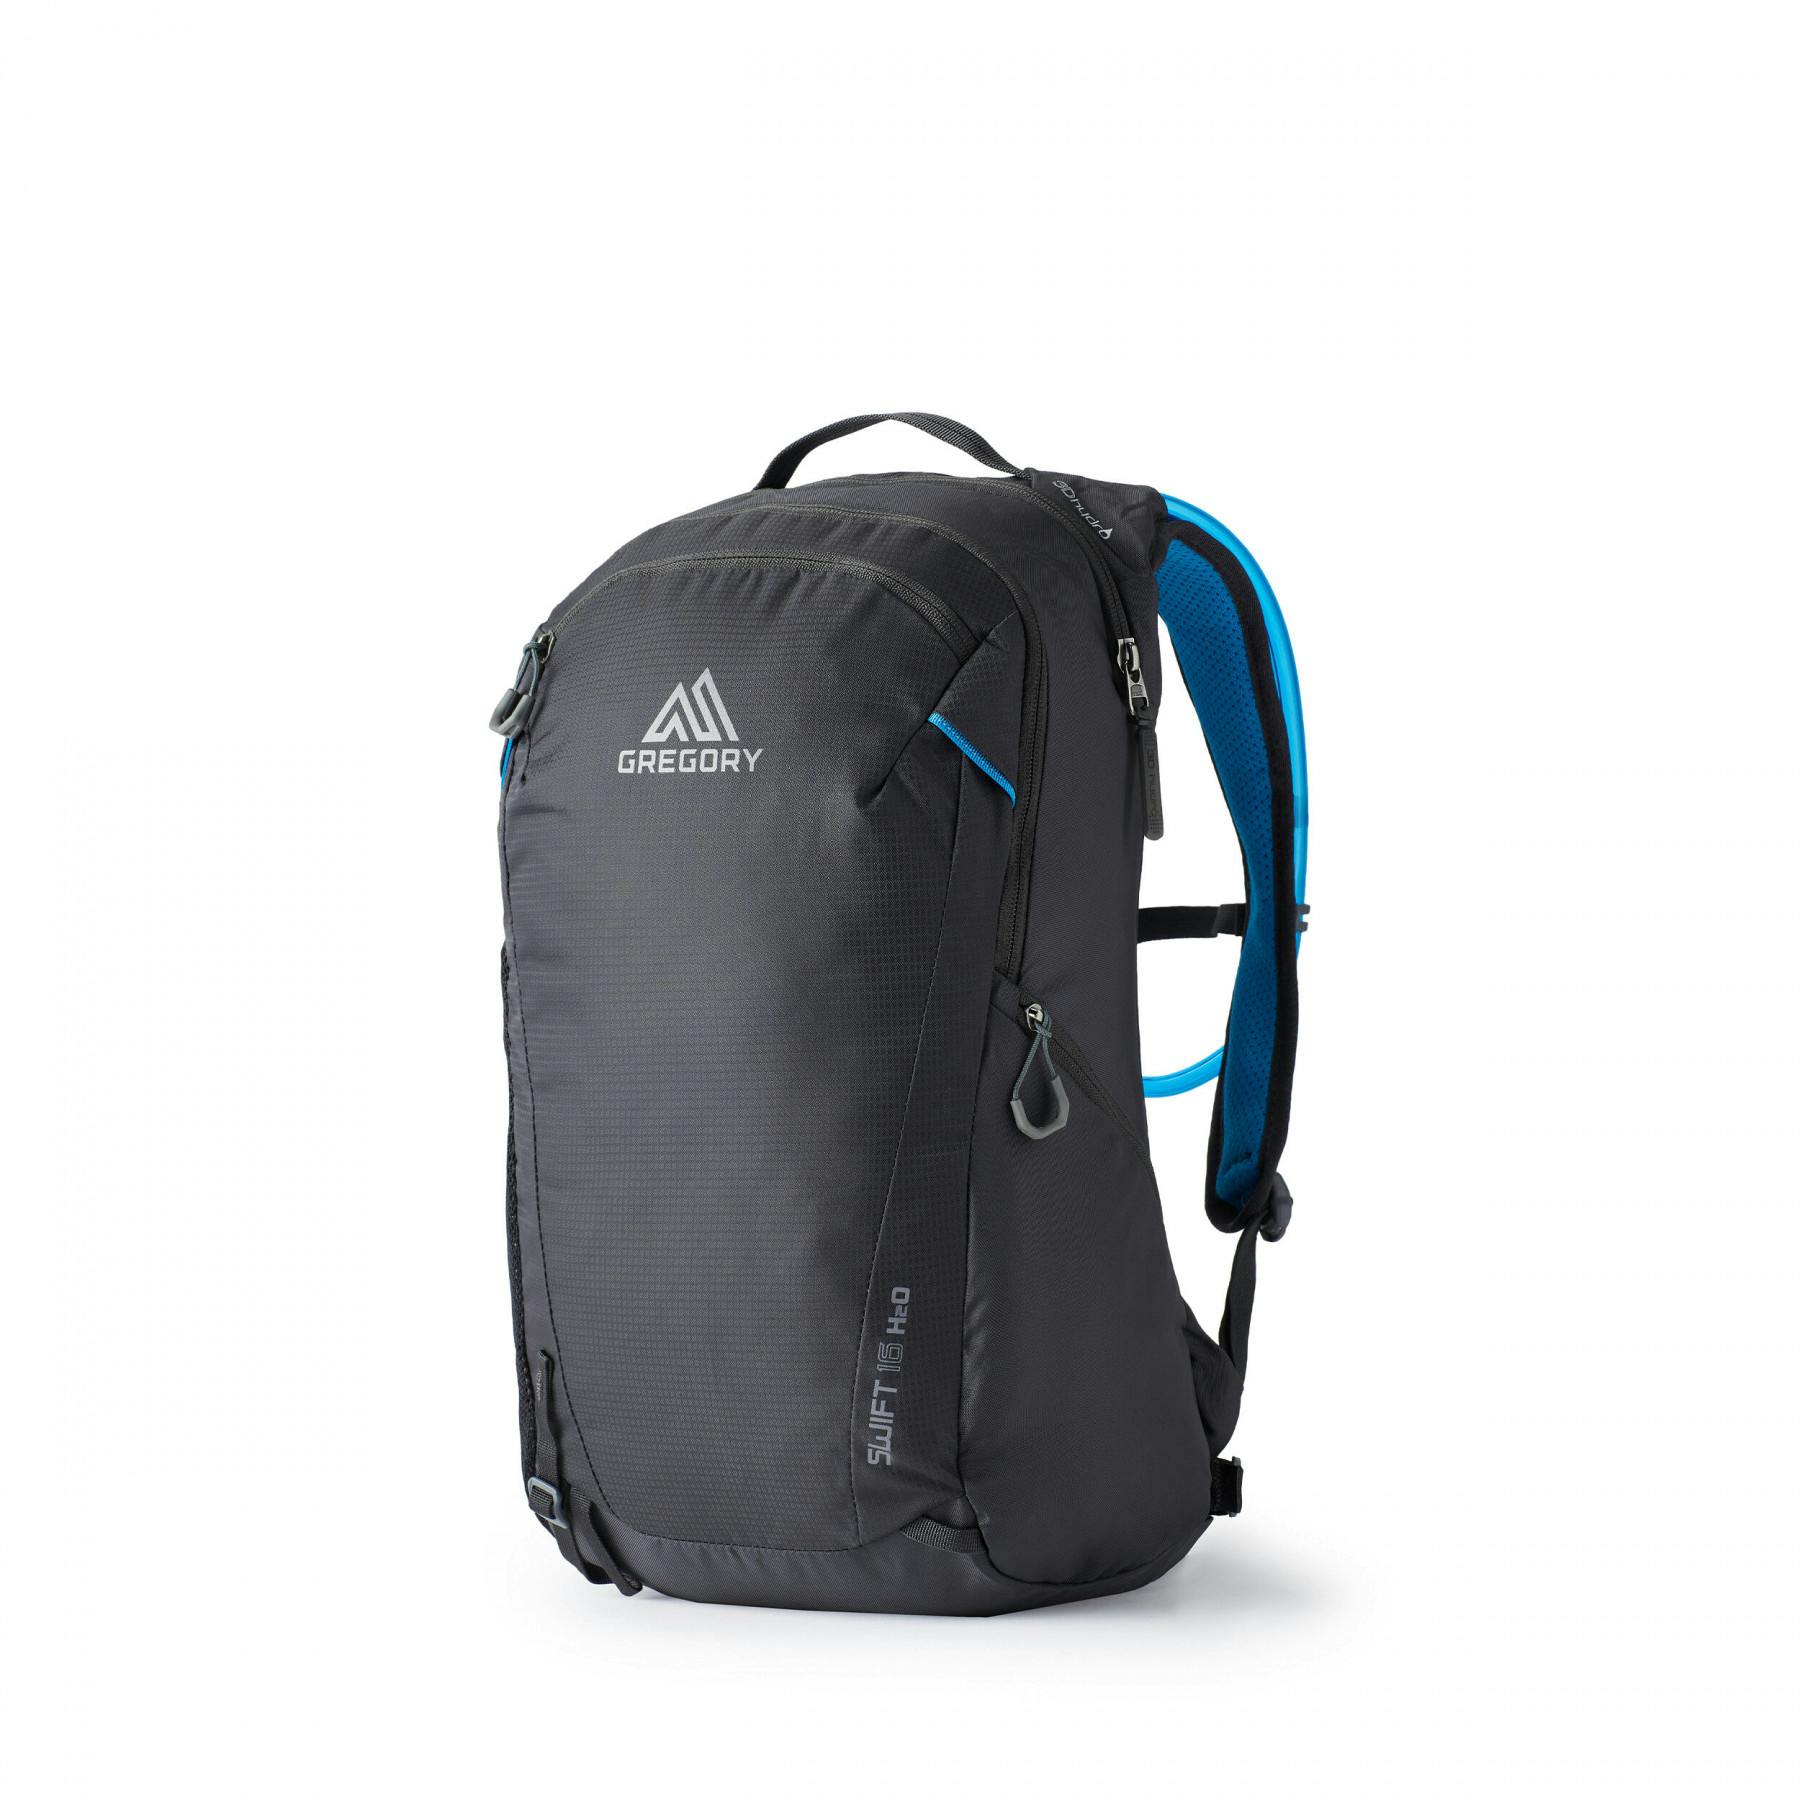 Gregory Swift 16 H2O Hydration Backpack · Xeno Black